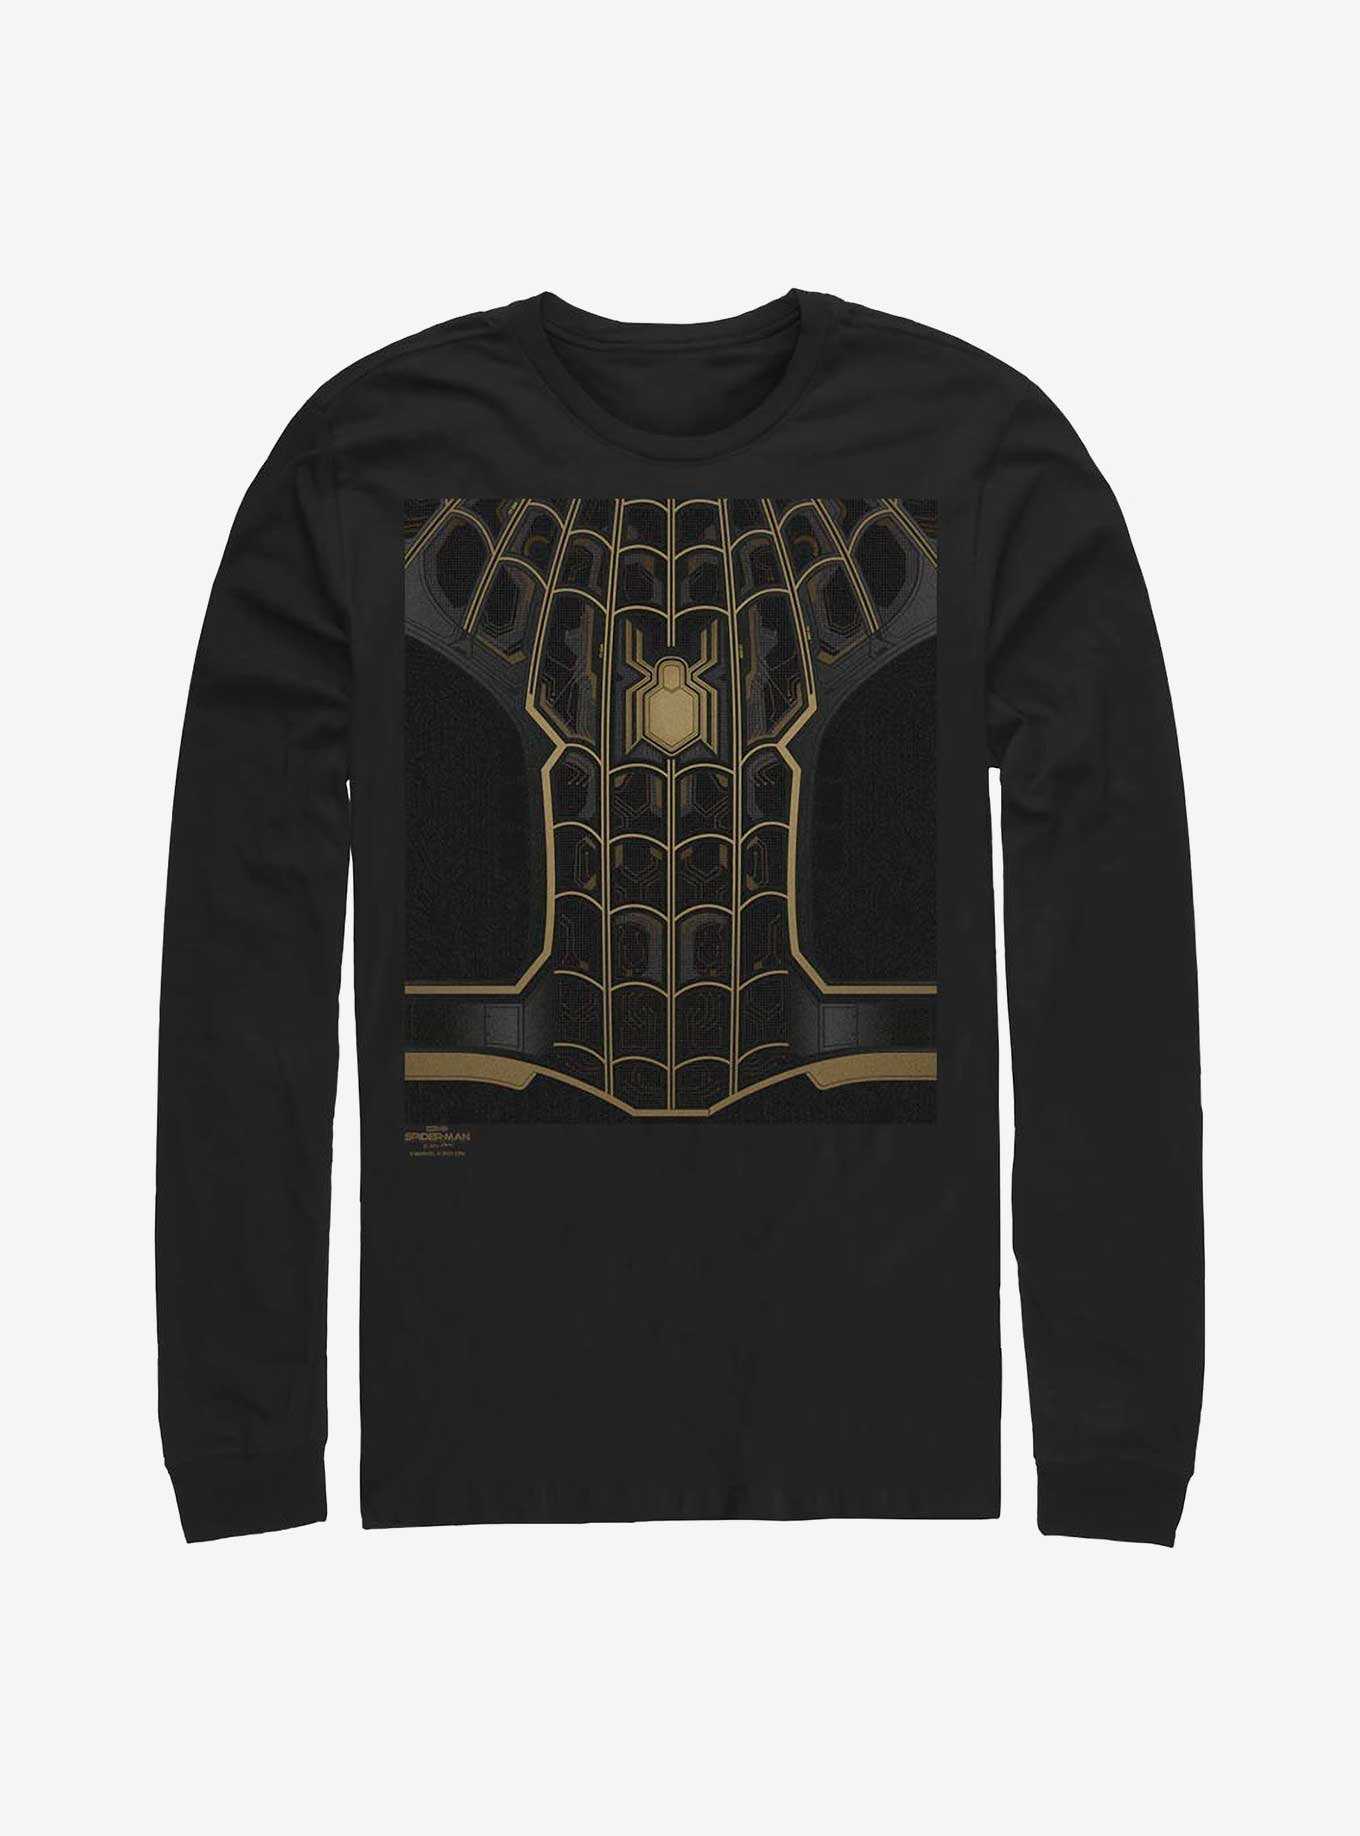 Marvel Spider-Man: No Way Home The Black Suit Long-Sleeve T-Shirt, , hi-res